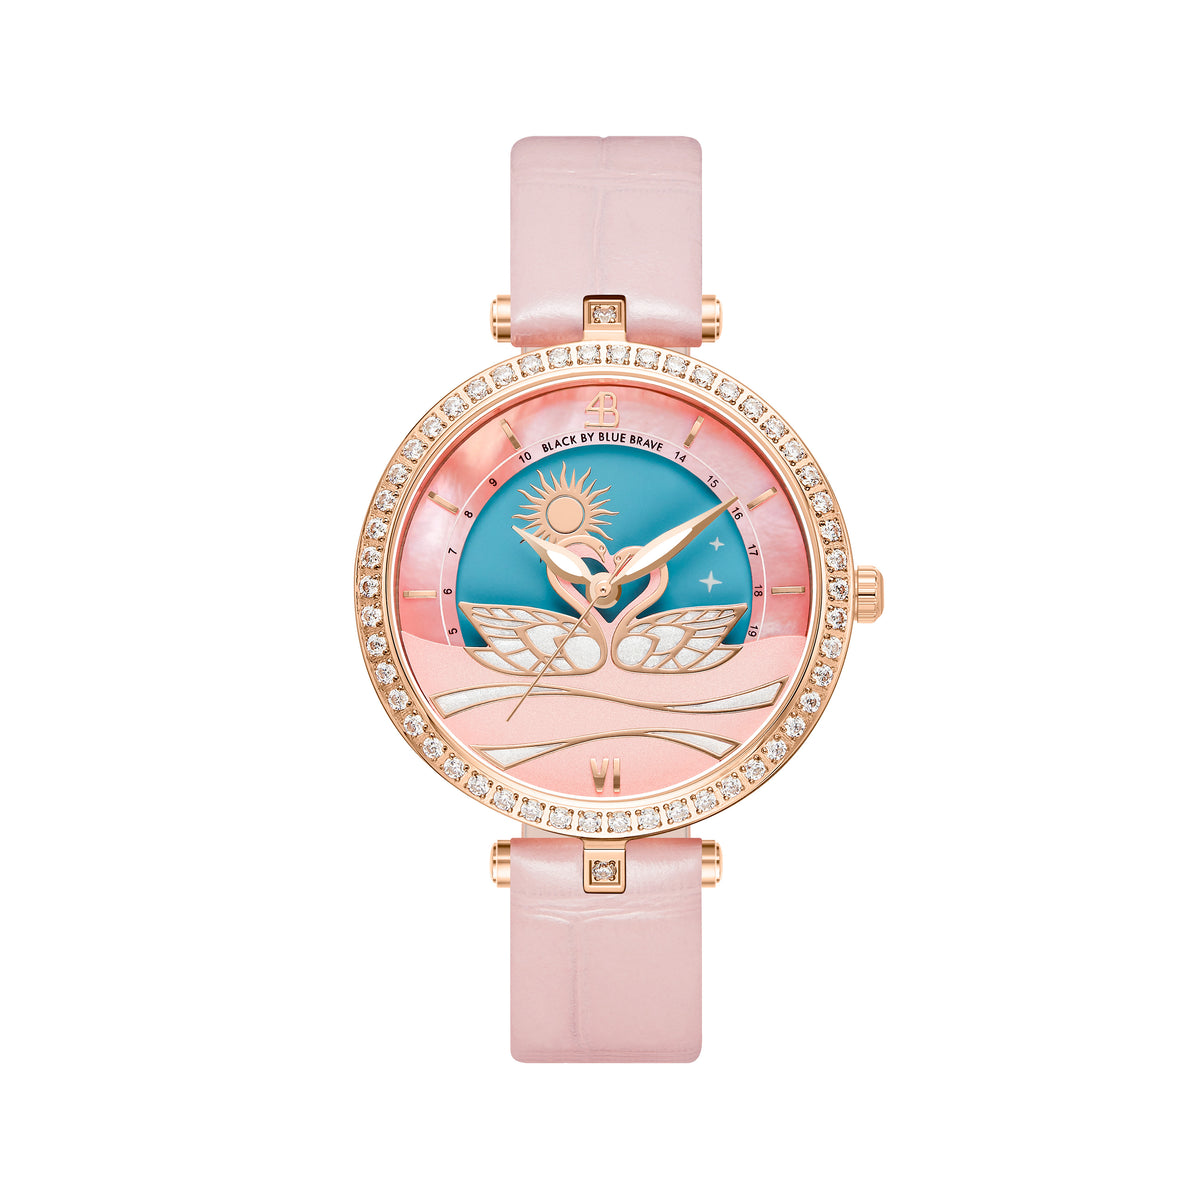 SWAN LOVERS PINK - 4B Watches